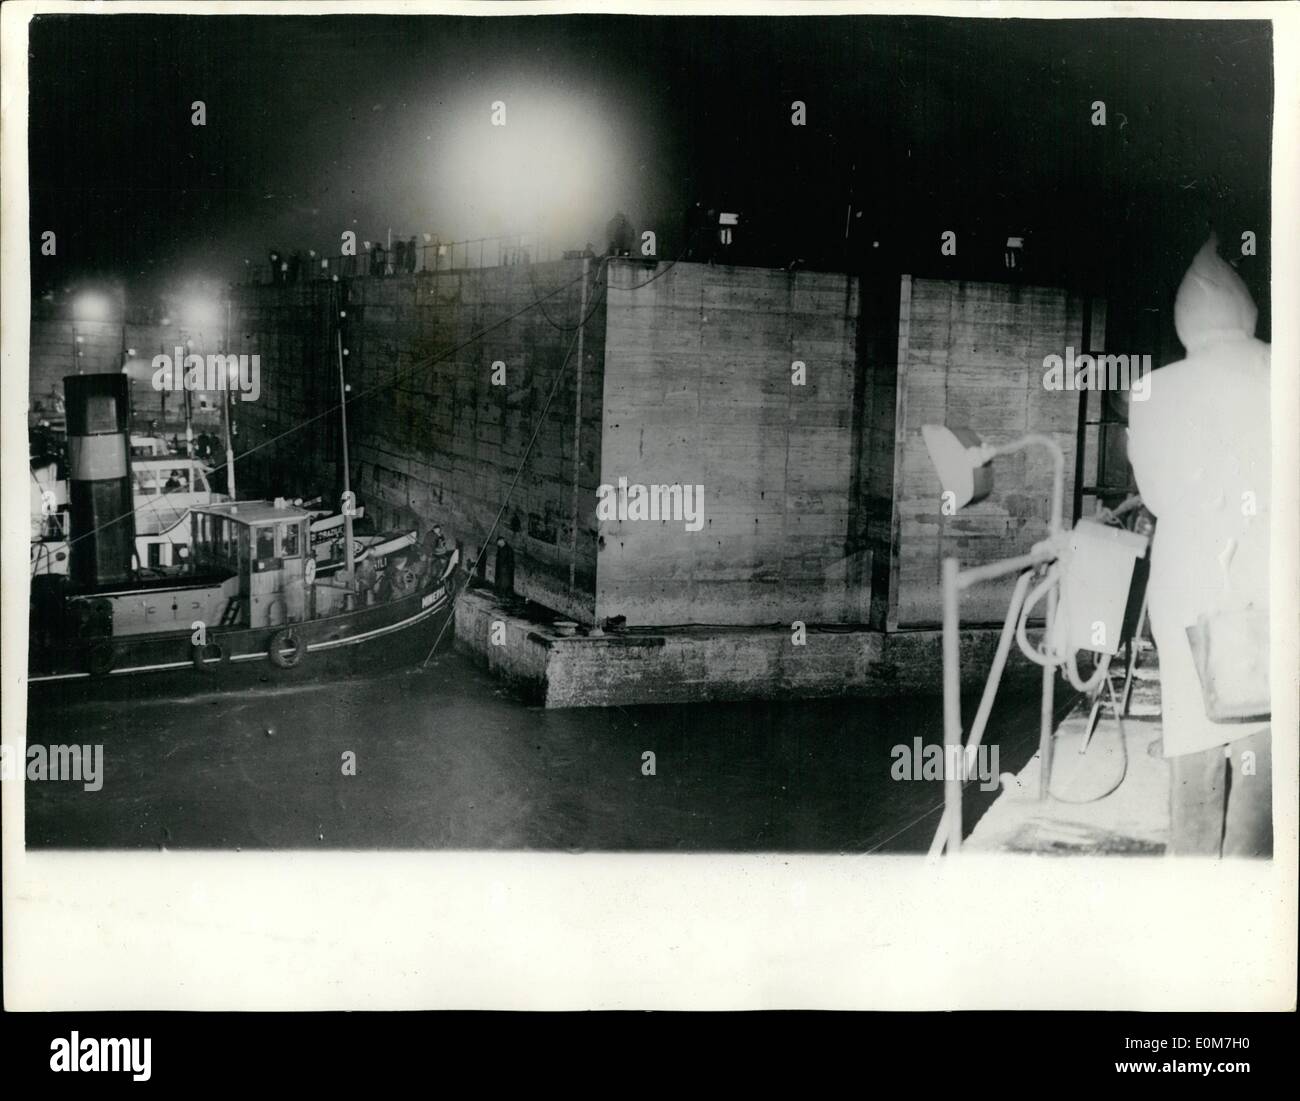 Nov. 11, 1953 - Holland closes the breeches. the final dykes are placed into position. Photo shows: Work goes on far into the night with the aid of flood lights - as the final caissons are placed into position at Ouwerkerk at the Isle of Schouwan. The placing of these caissons concludes the work that has been going throughout the Netherlands to repair the damages caused by the disastrous floods of February this year....Each of the caissons are about 60 metes in length. Stock Photo